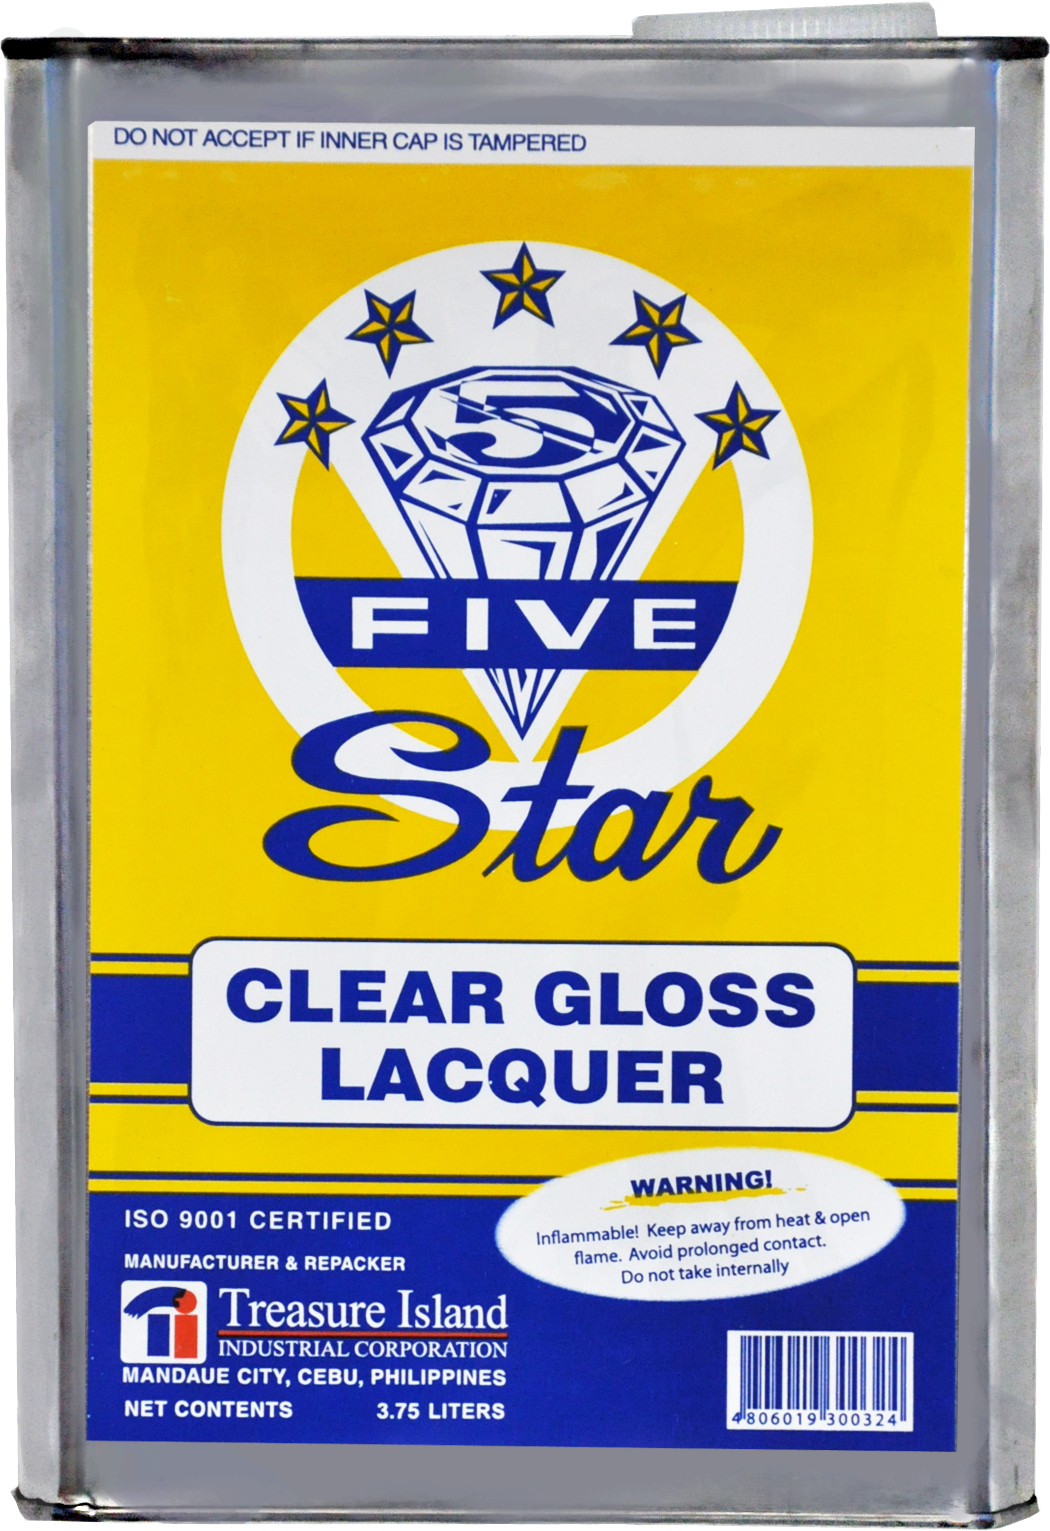 Five-Star-Clear-Gloss-Lacquer